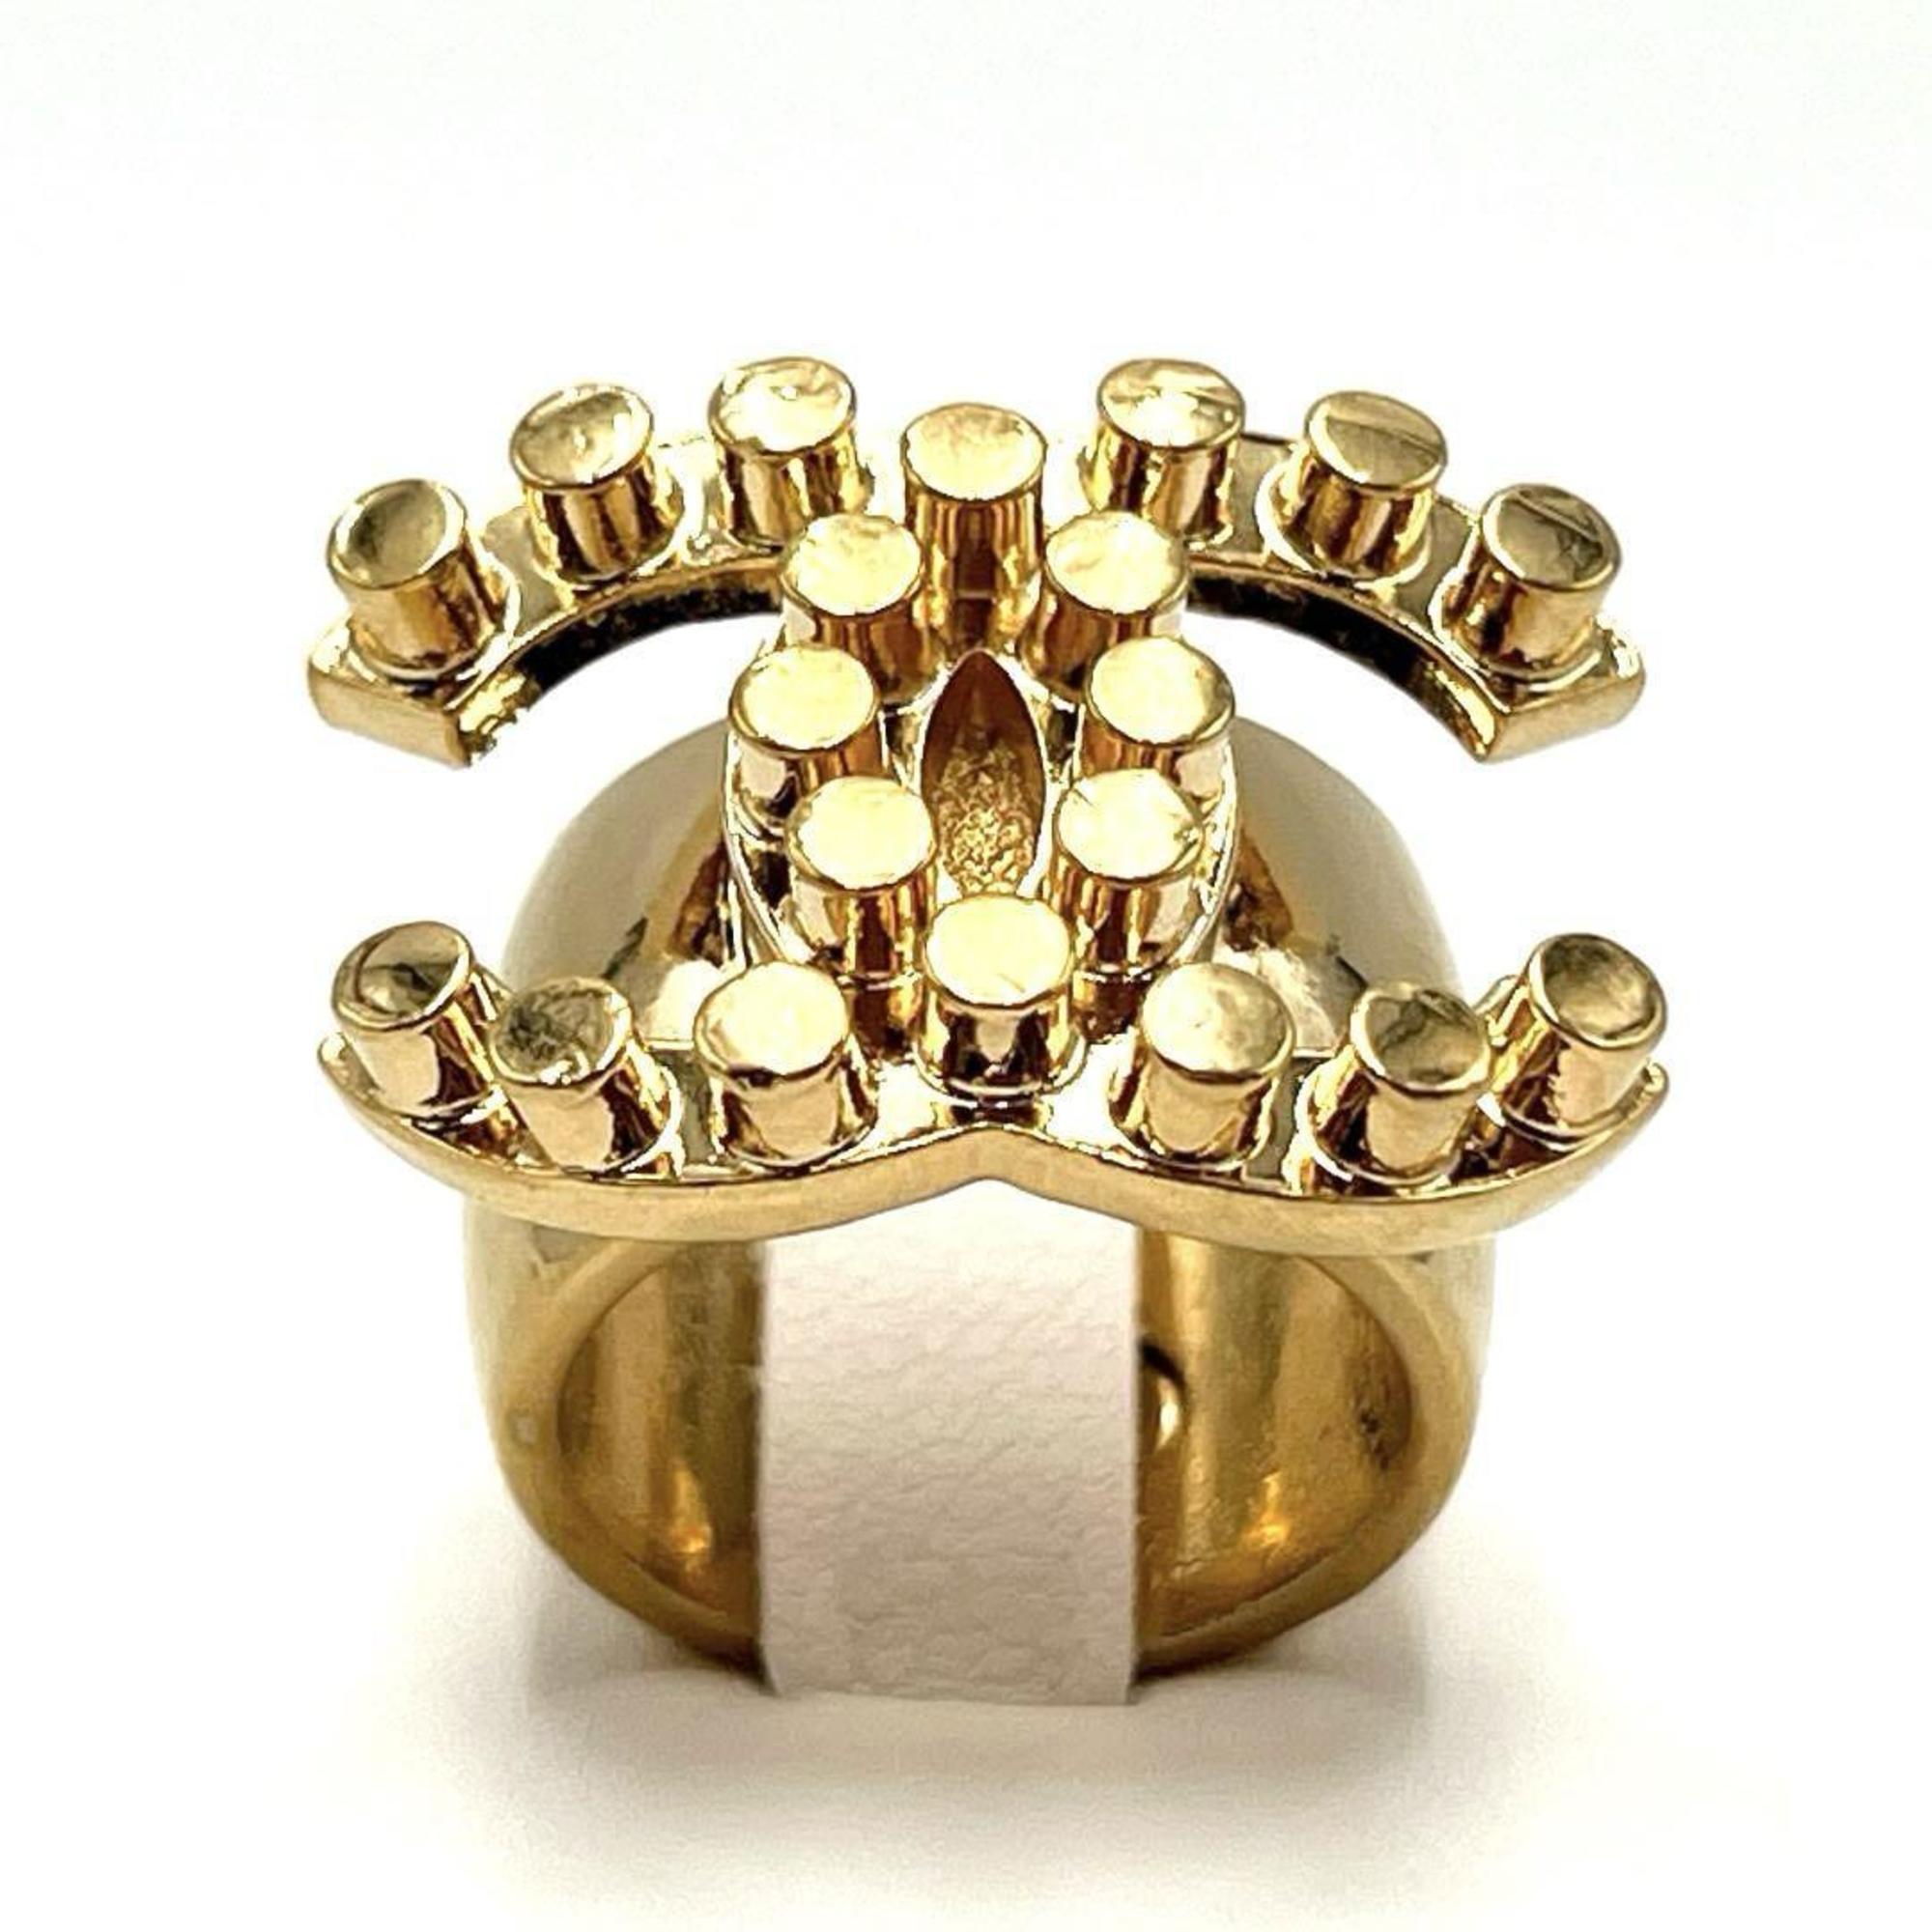 CHANEL Women's Coco Mark Ring Vintage